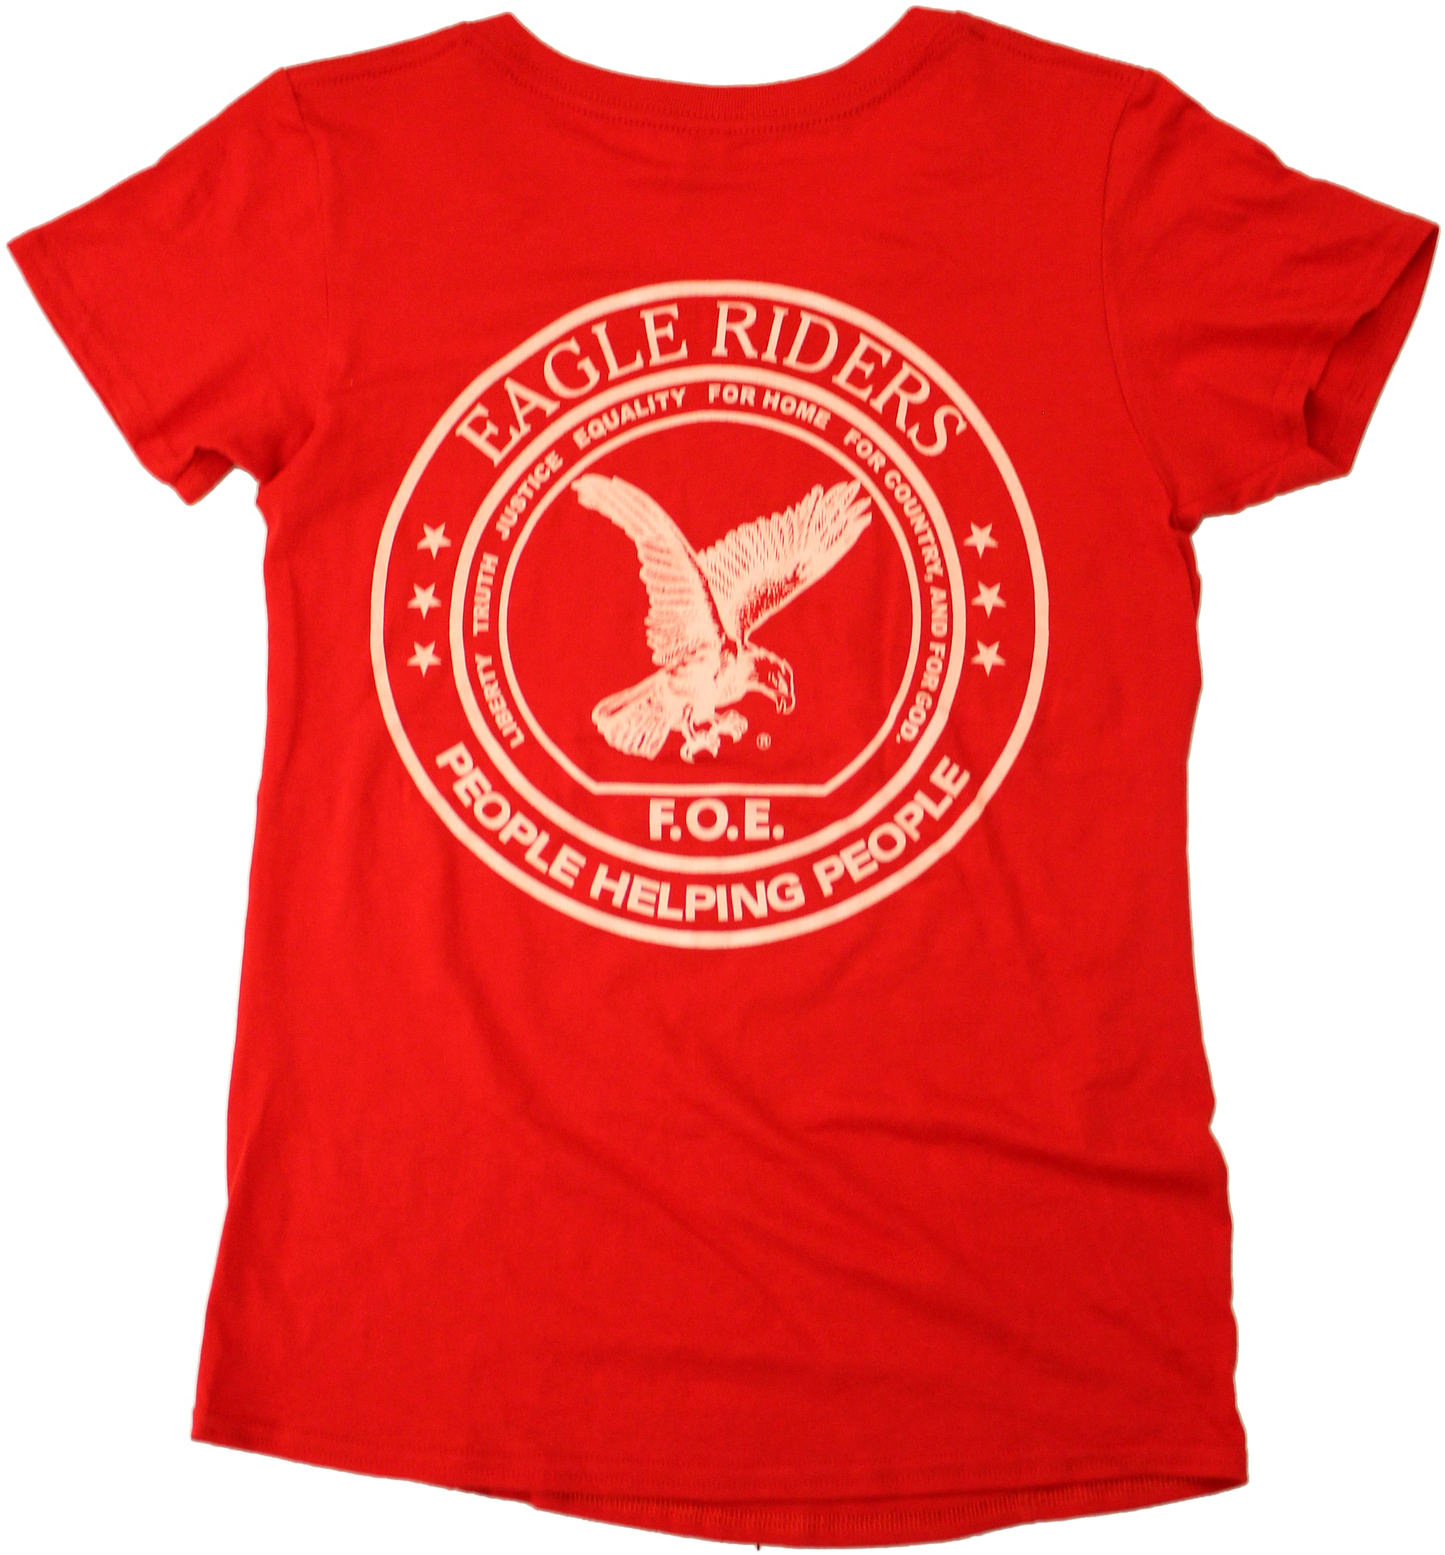 Ladies' Eagle Riders T-Shirt (Back Only)